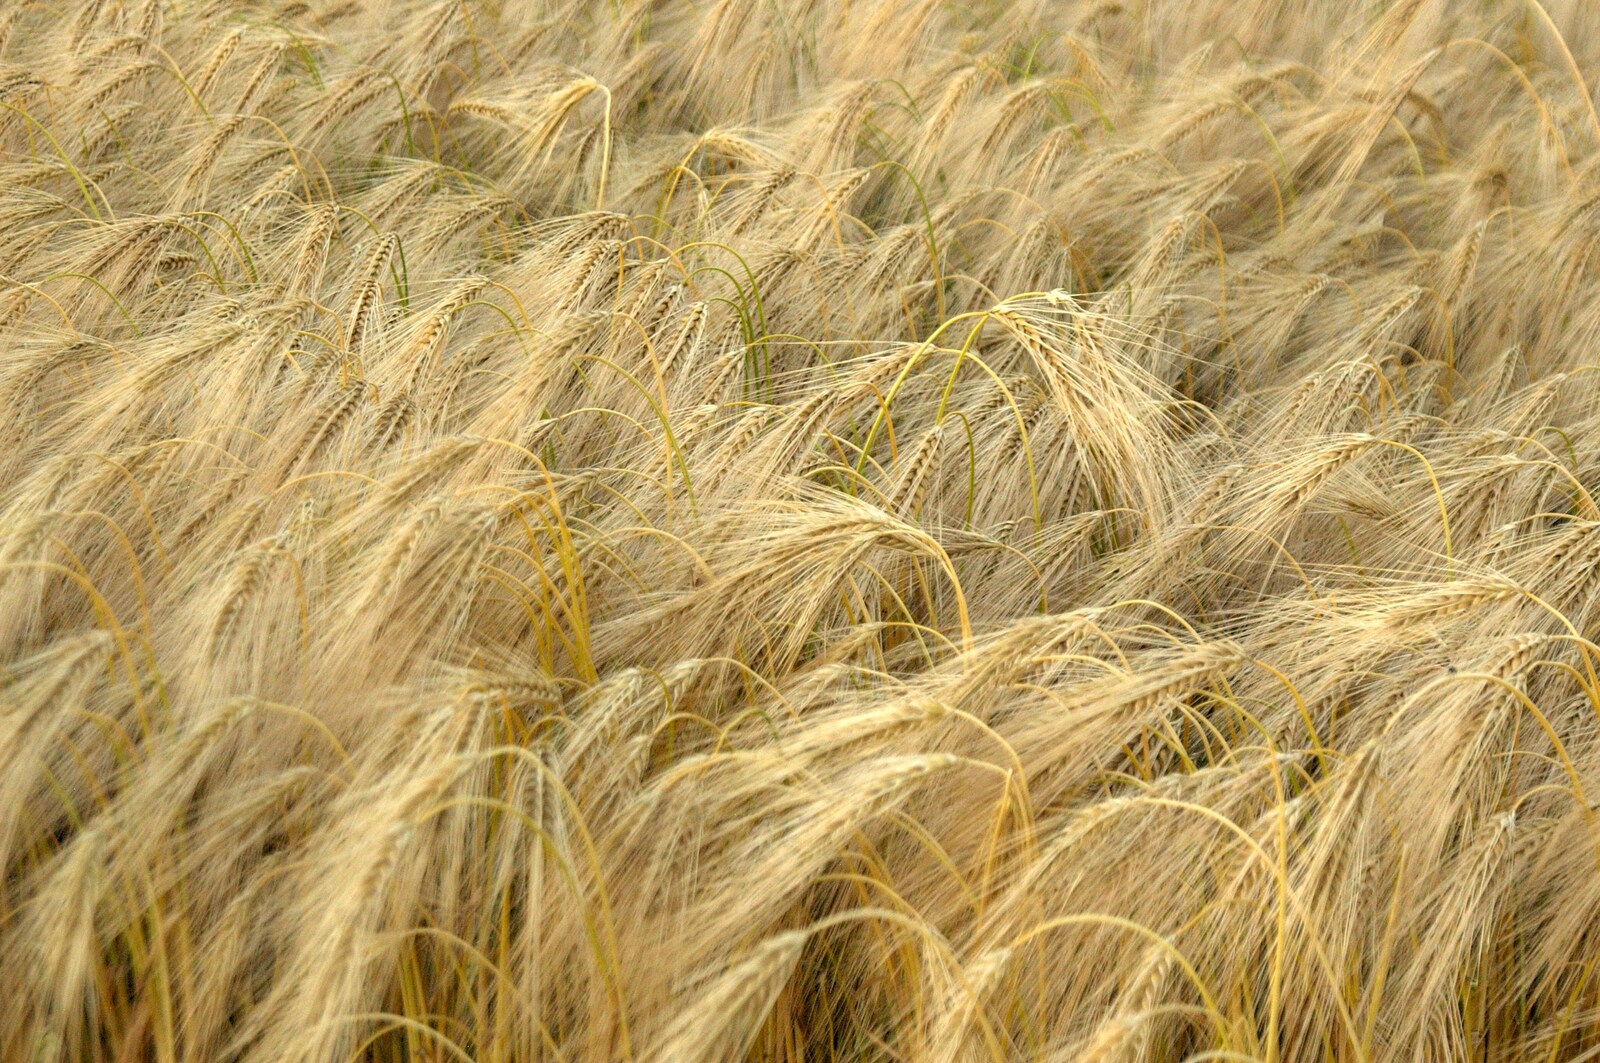 A field of barley waves in the breeze from The BBs Play Athelington Hall, Horham, Suffolk - 29th June 2006